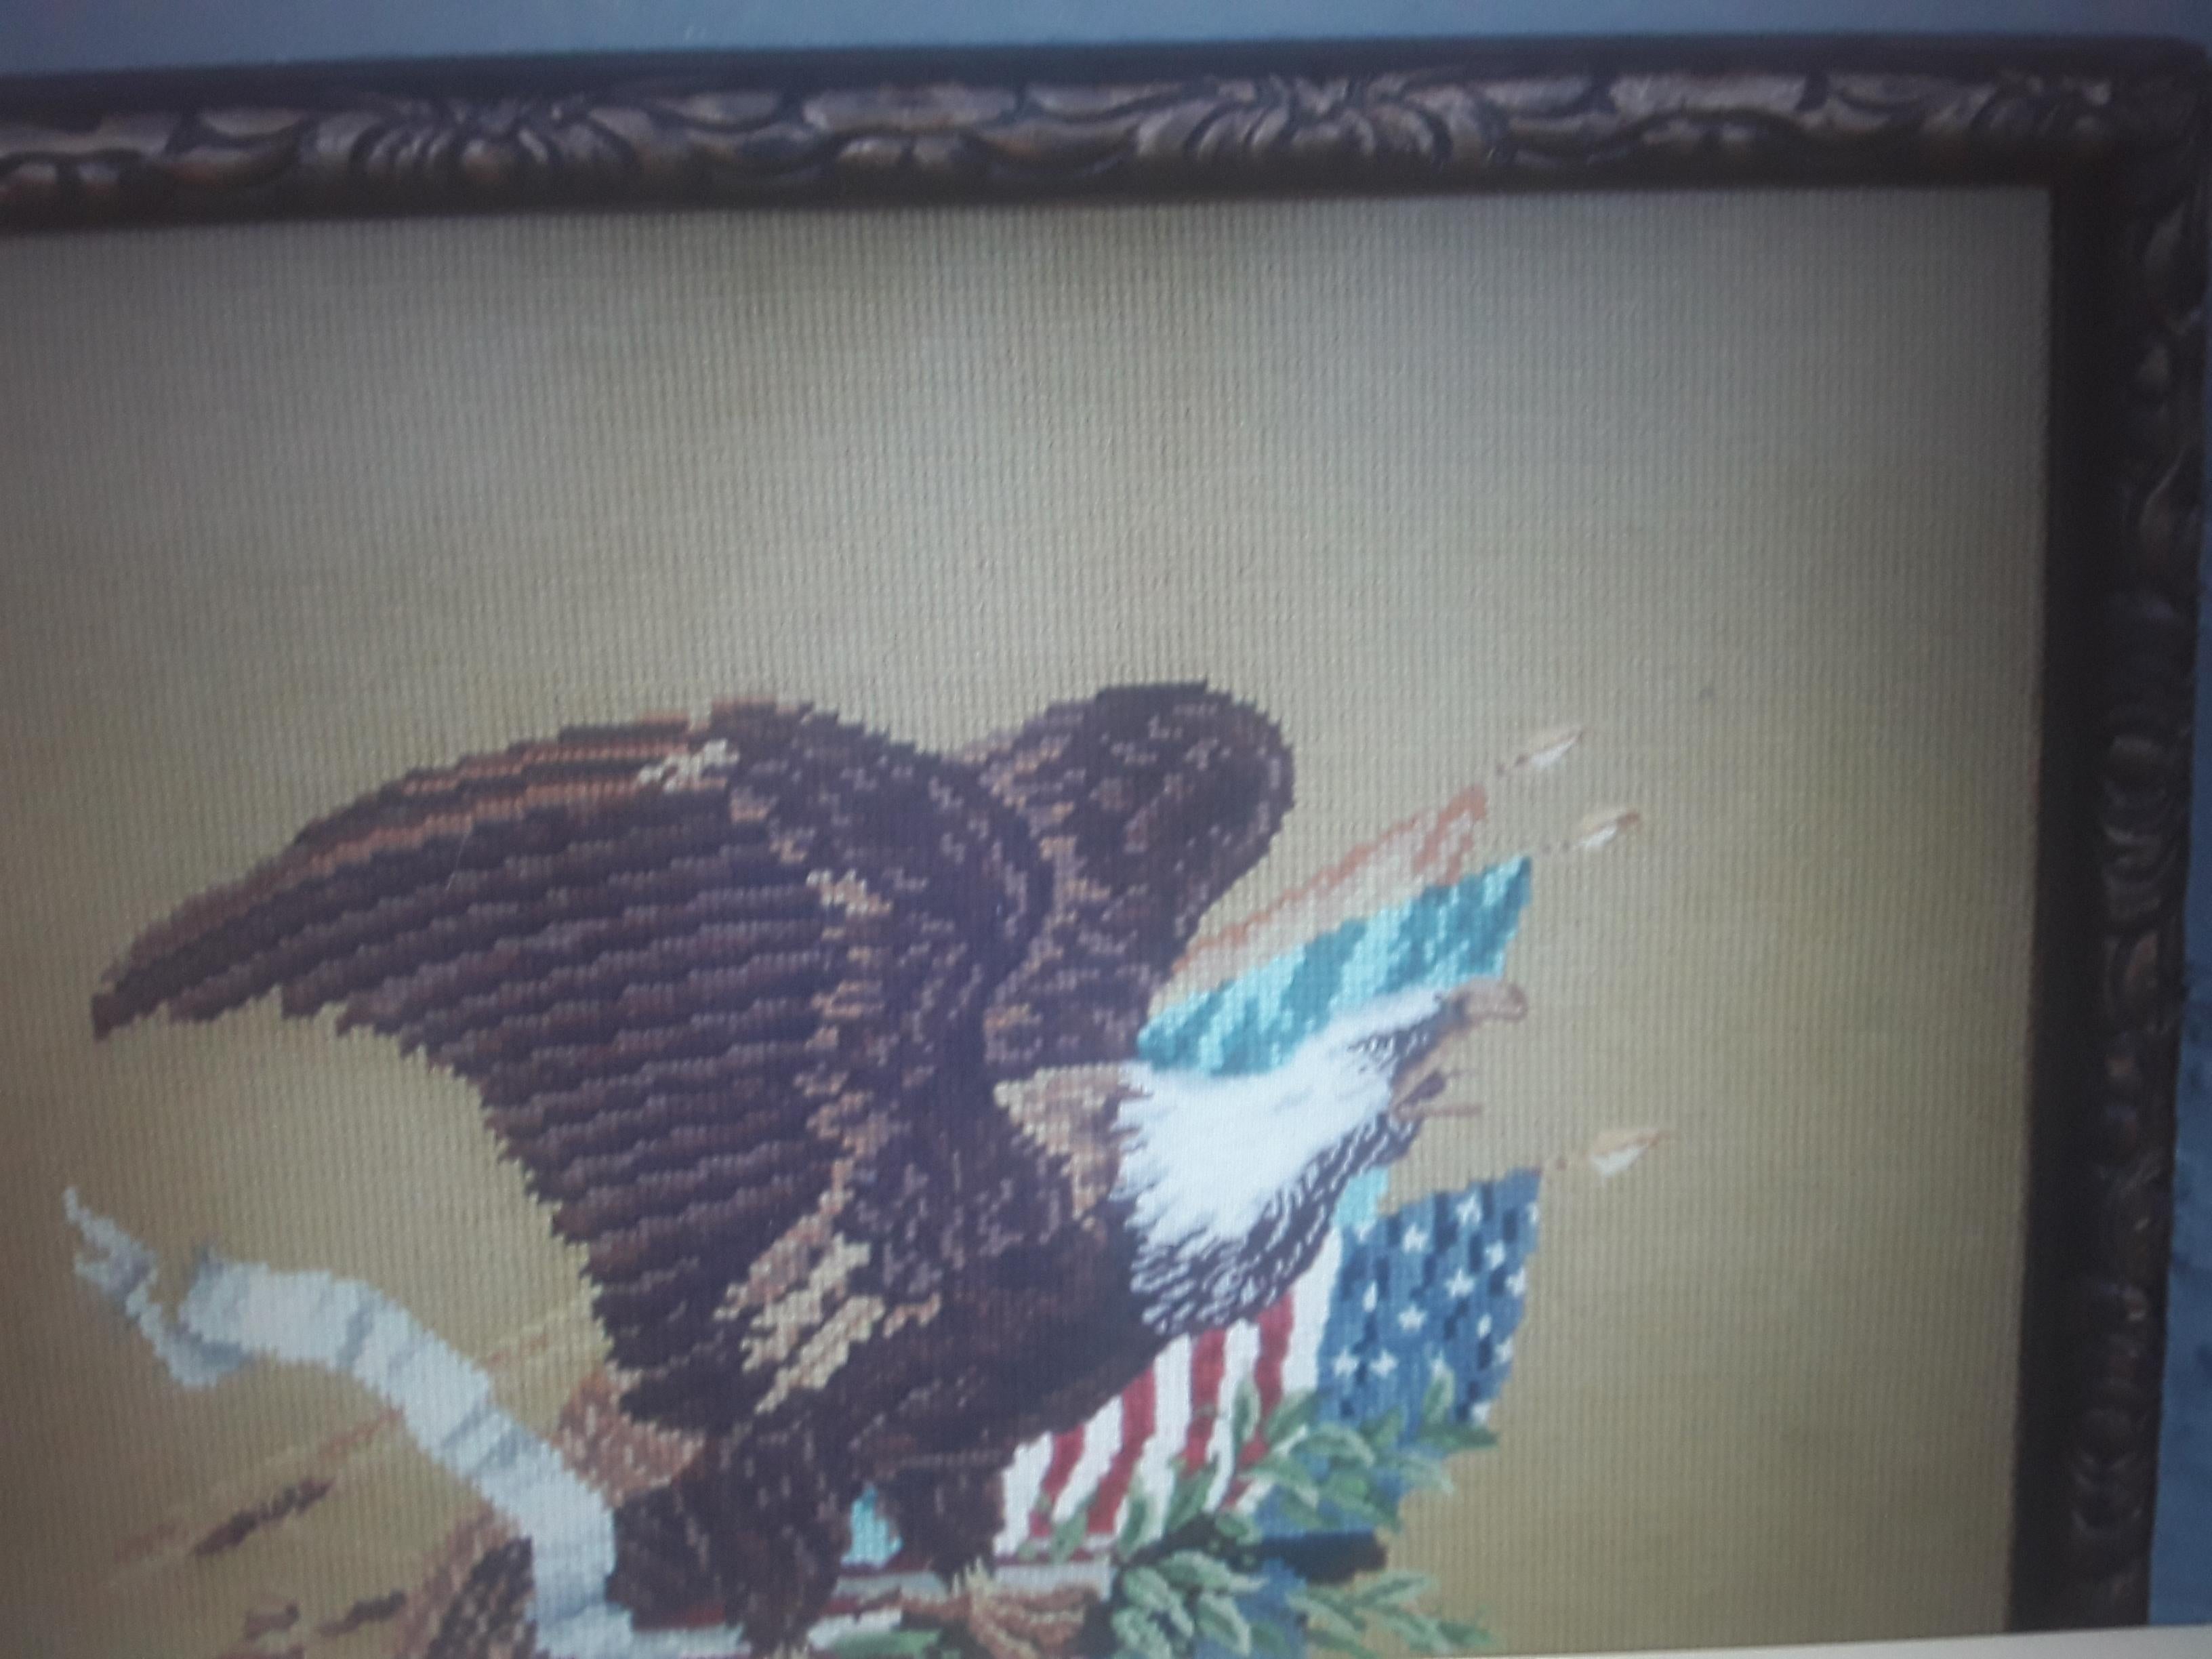 Yarn 1940's Vintage Hand Stitched and Framed Needlepoint Eagle Scene U.S.A. Patriotic For Sale